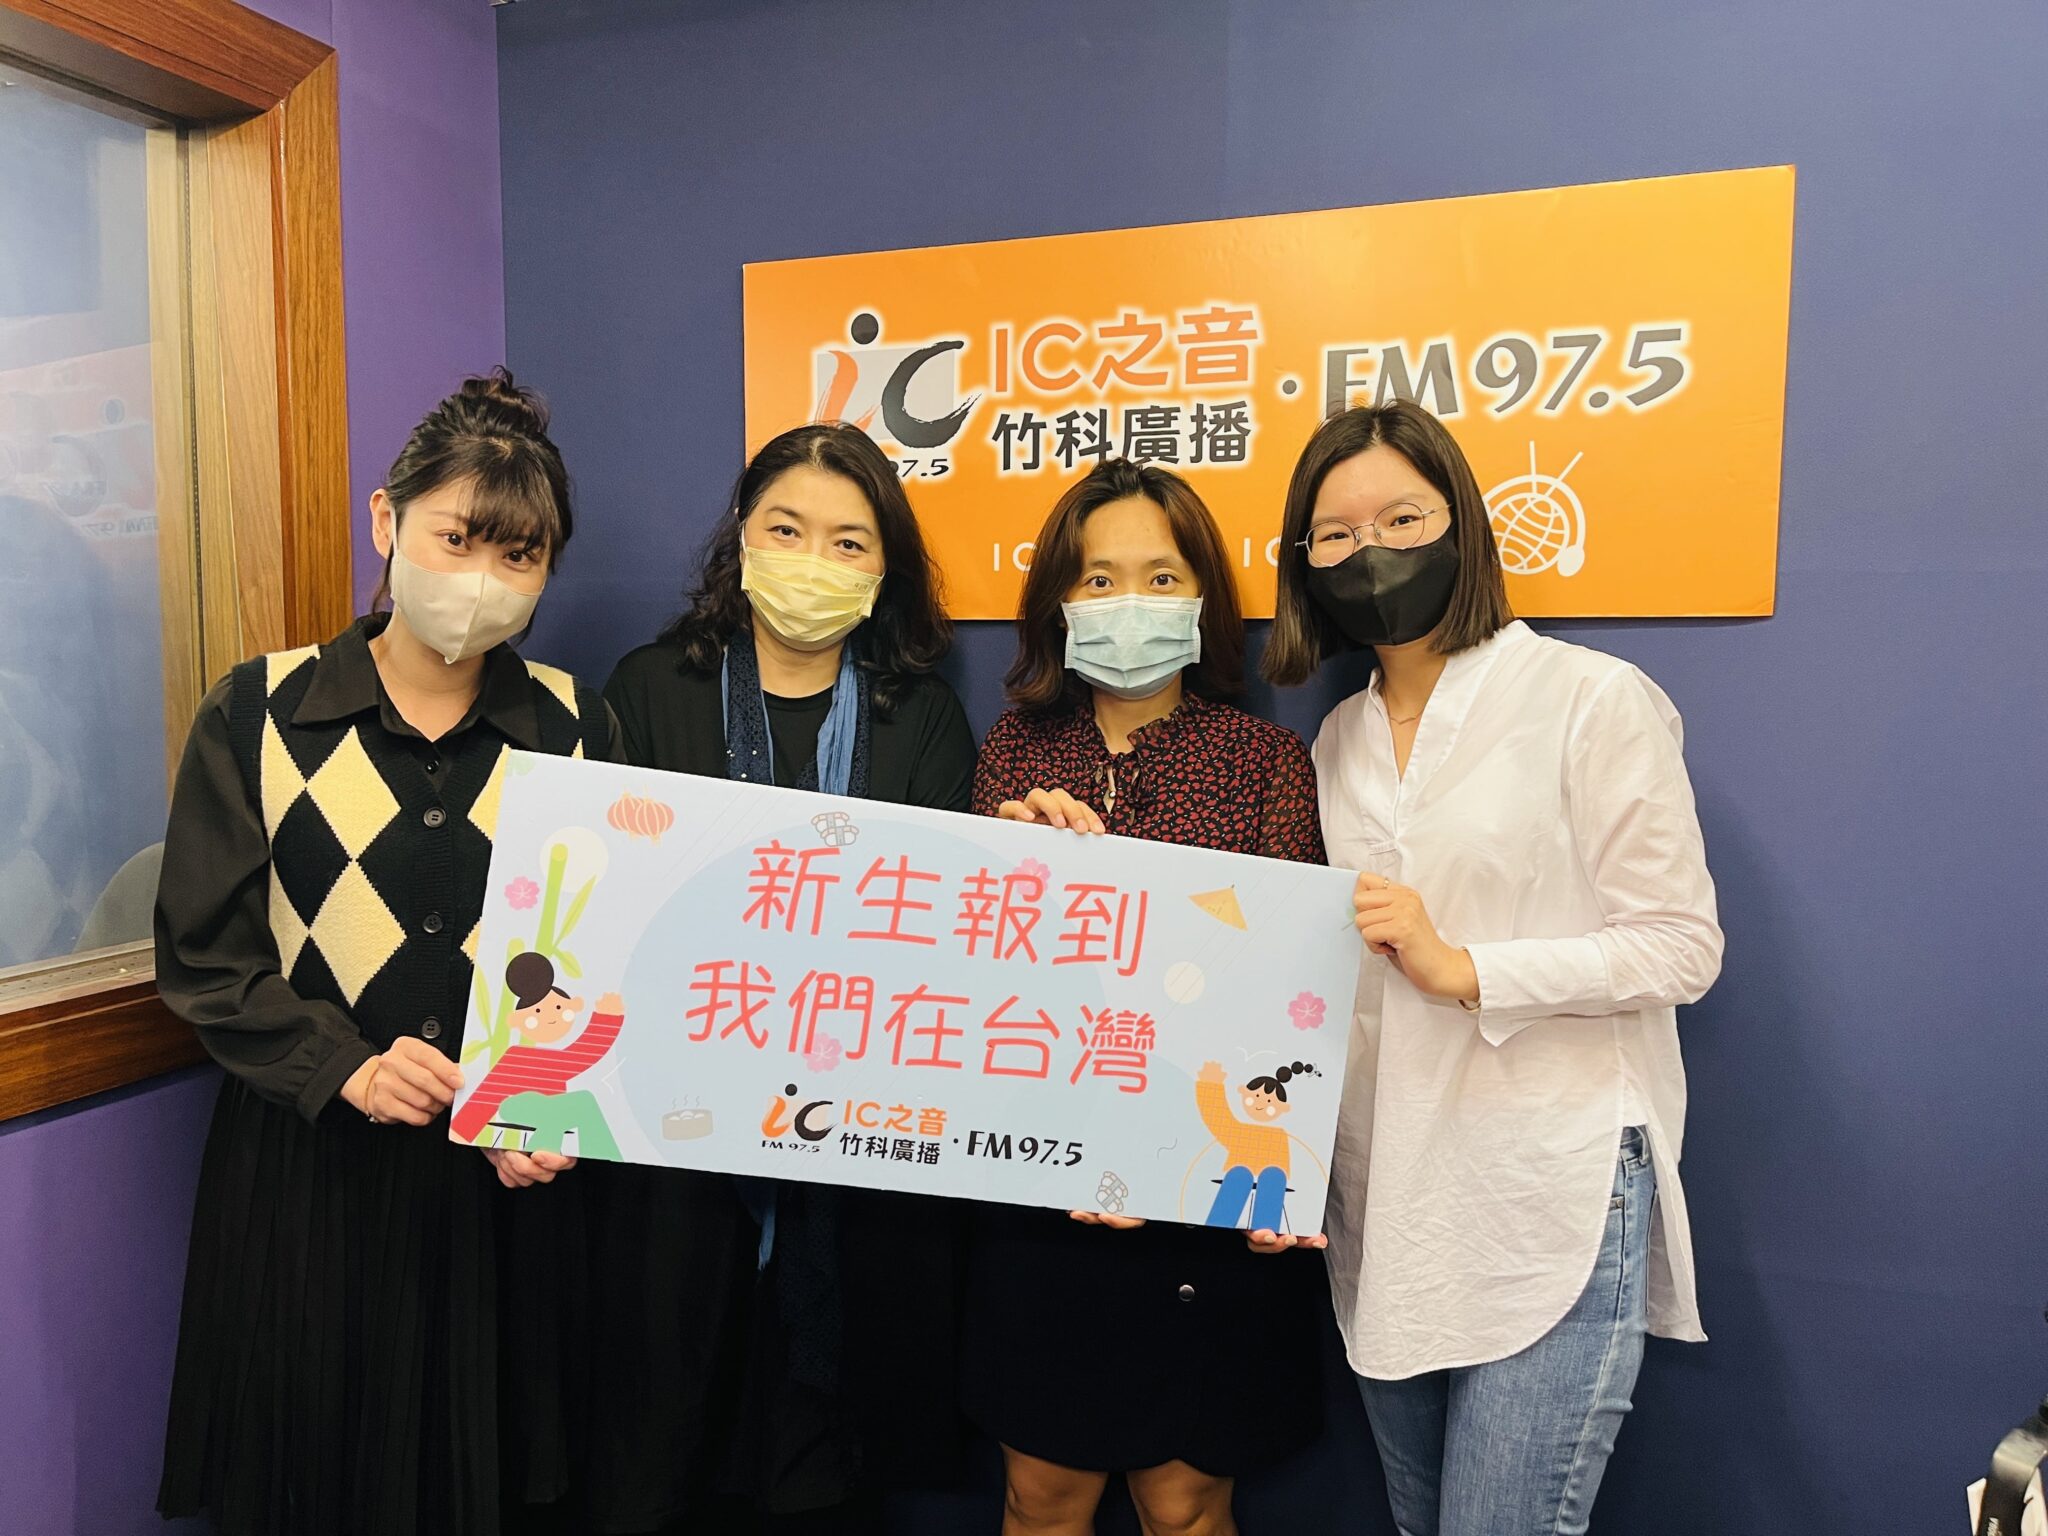 The New Immigrant Languages Advisory Group of Hsinchu builds a society with diversity & inclusion together with students. (Photo / Provided by ILAG-HC)